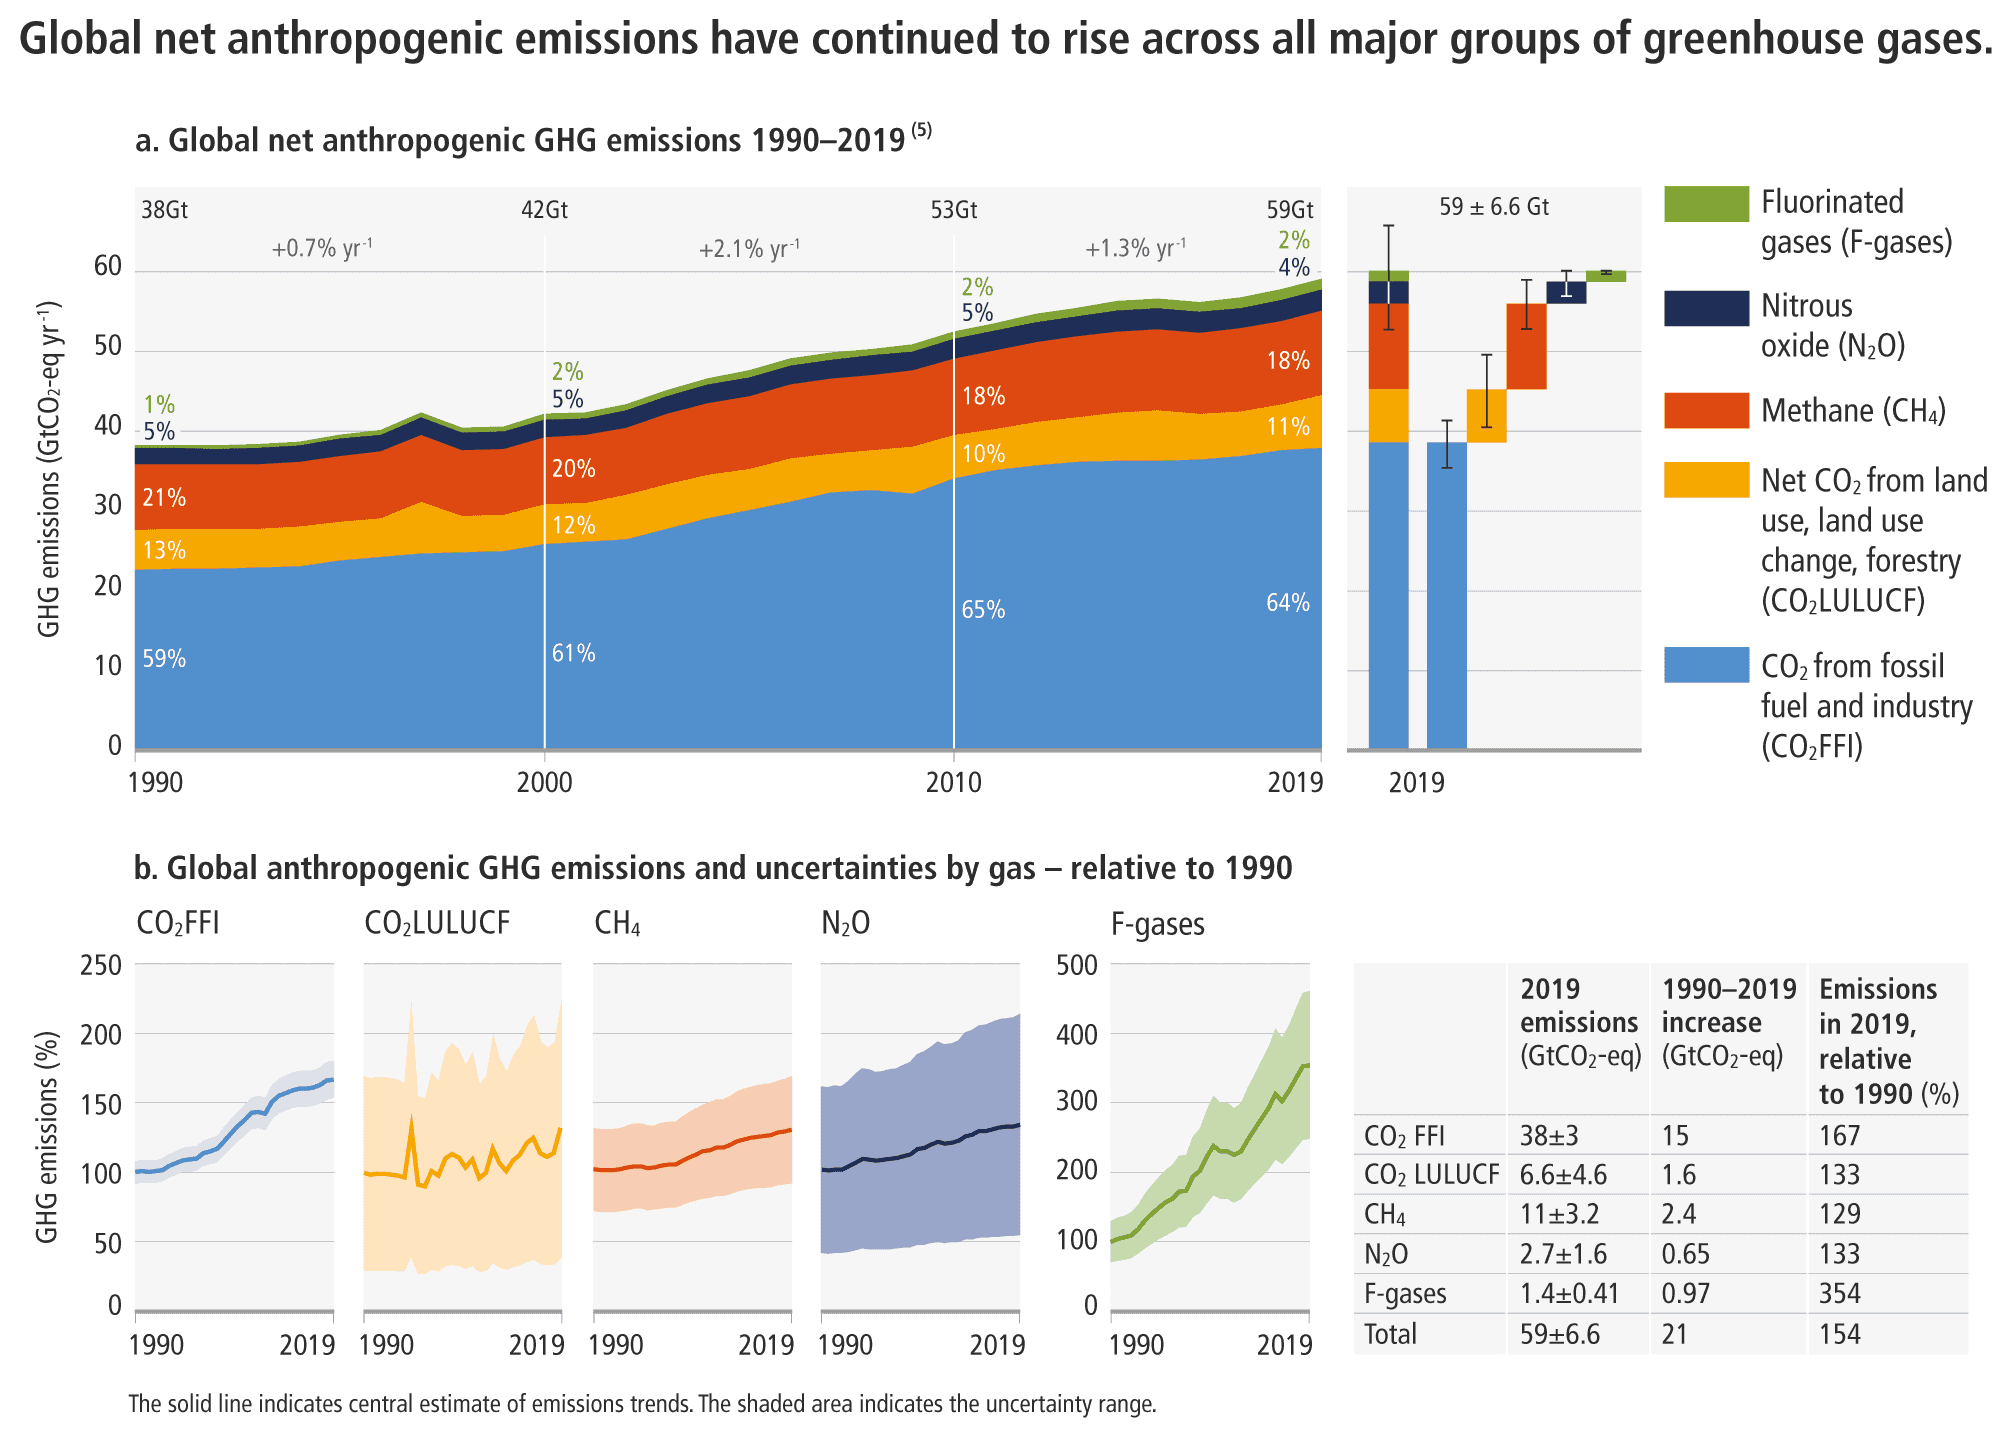 Global net anthropogenic greenhouse gas emissions, 1990-2019. Global net anthropogenic emissions have continued to rise across all major groups of greenhouse gases, despite decades of promises by governments and corporations to reduce emissions. Graphic: IPCC